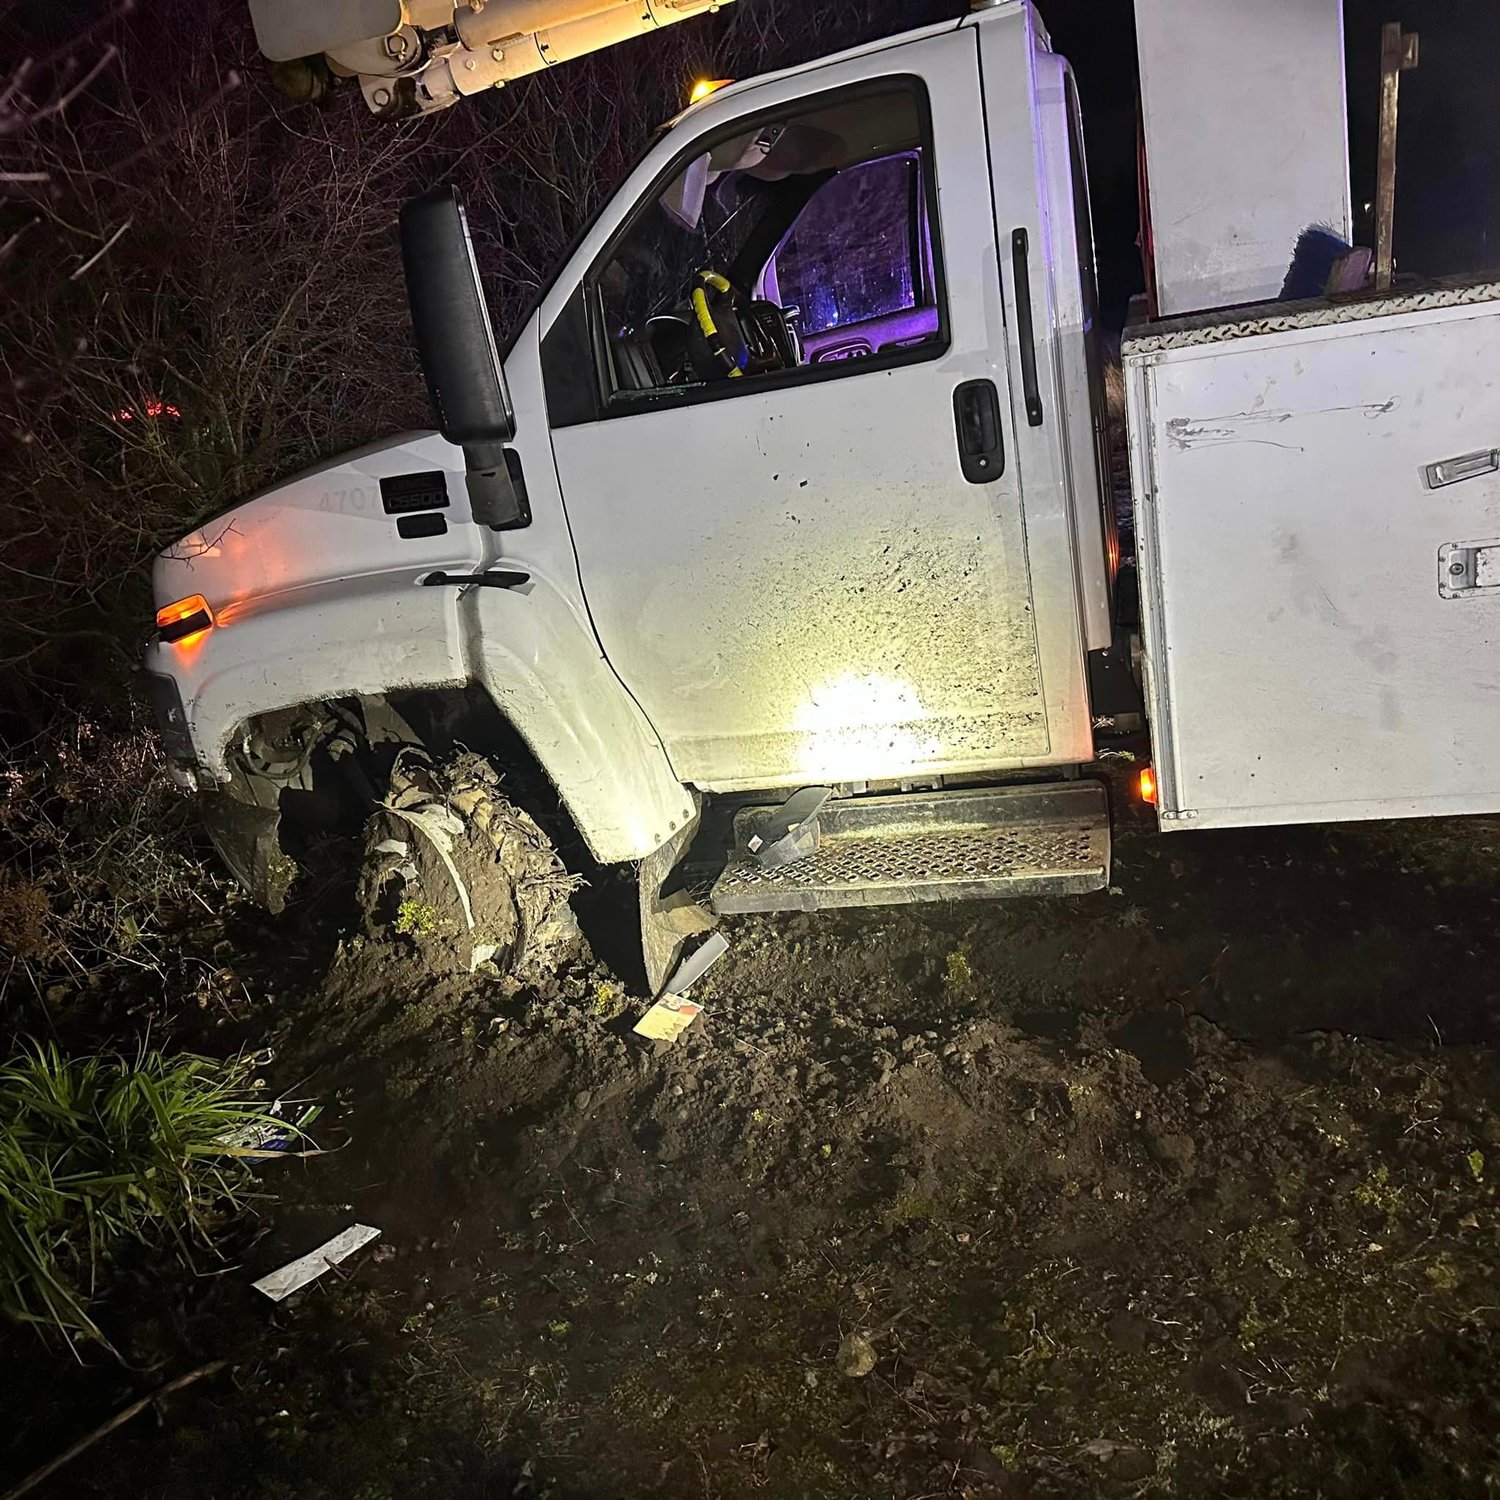 A pursuit in Thurston County ended in a fight between deputies and the suspect in a pile of cow dung, according to the Thurston County Sheriff’s Office. 